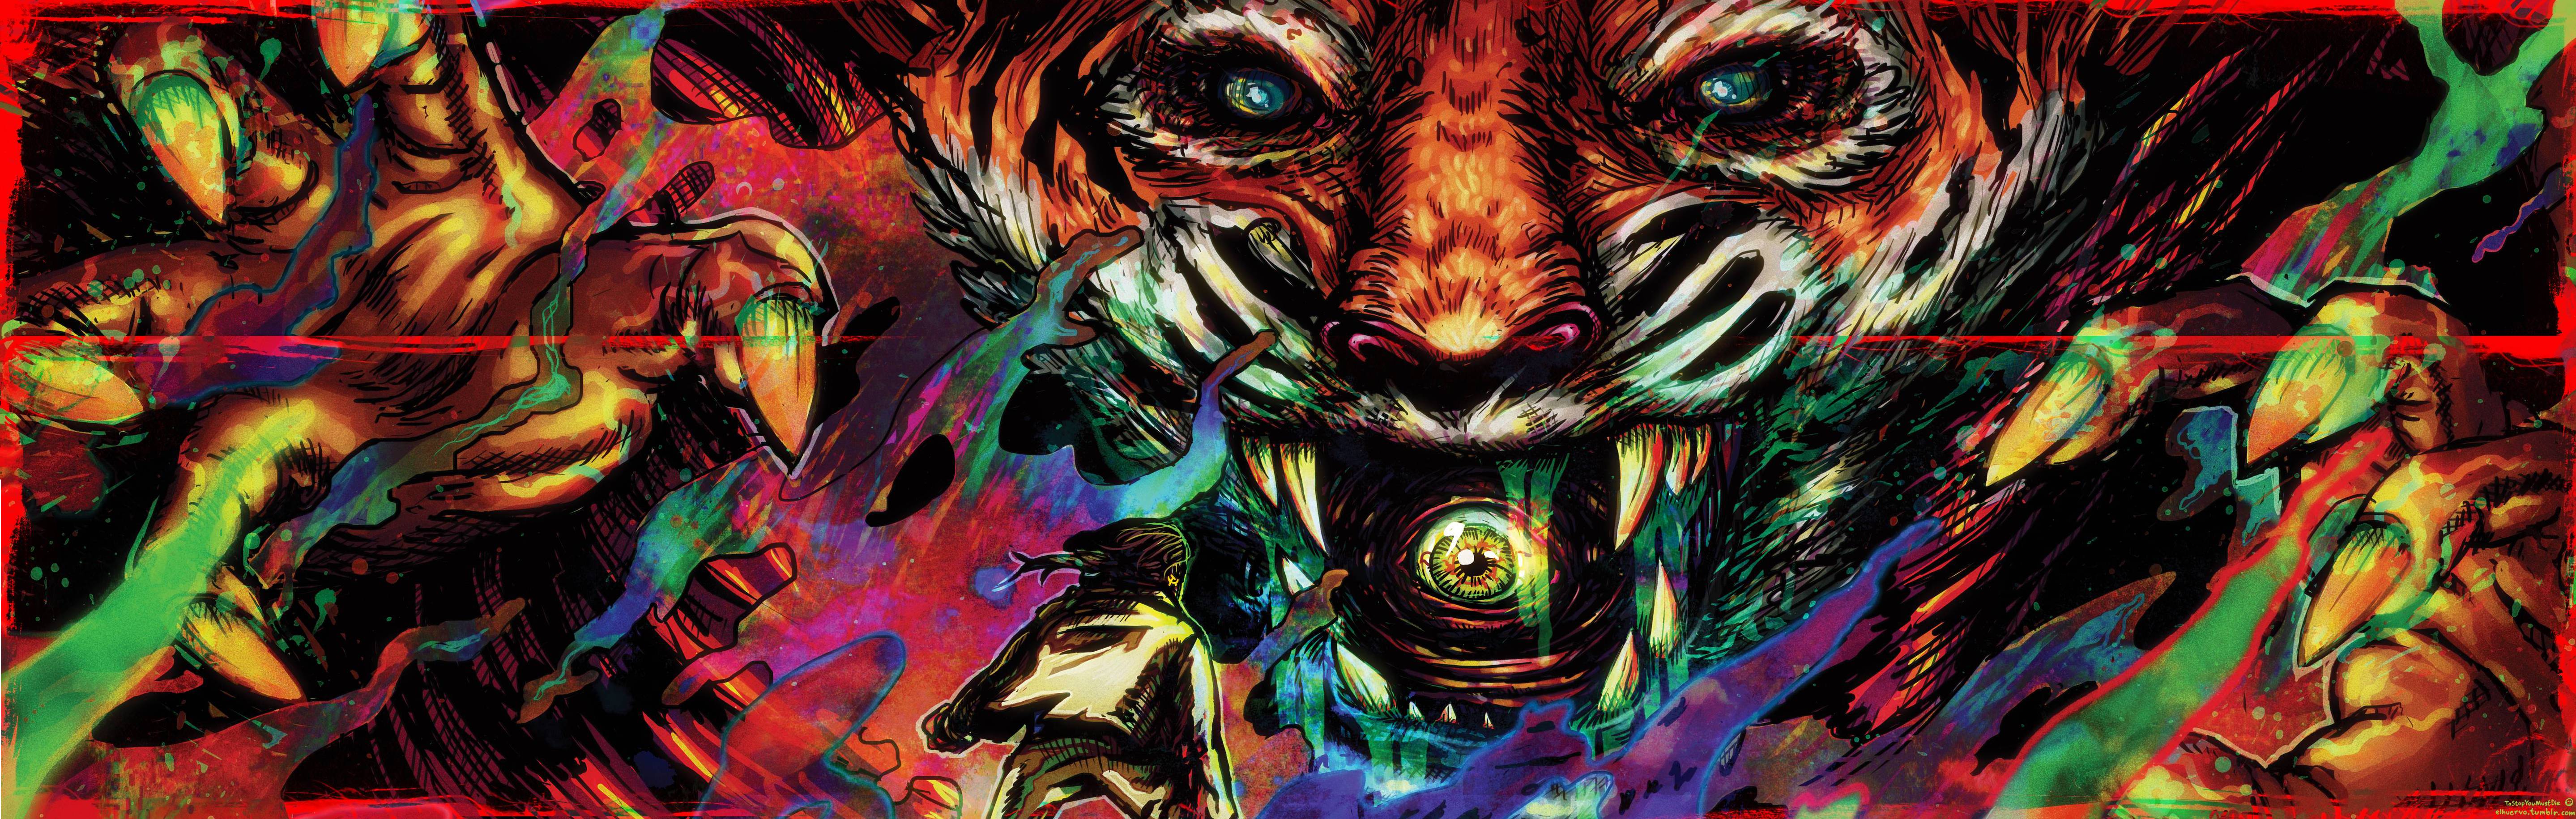 hotline miami 2: wrong number, video game, psychedelic, the son (hotline miami), hotline miami